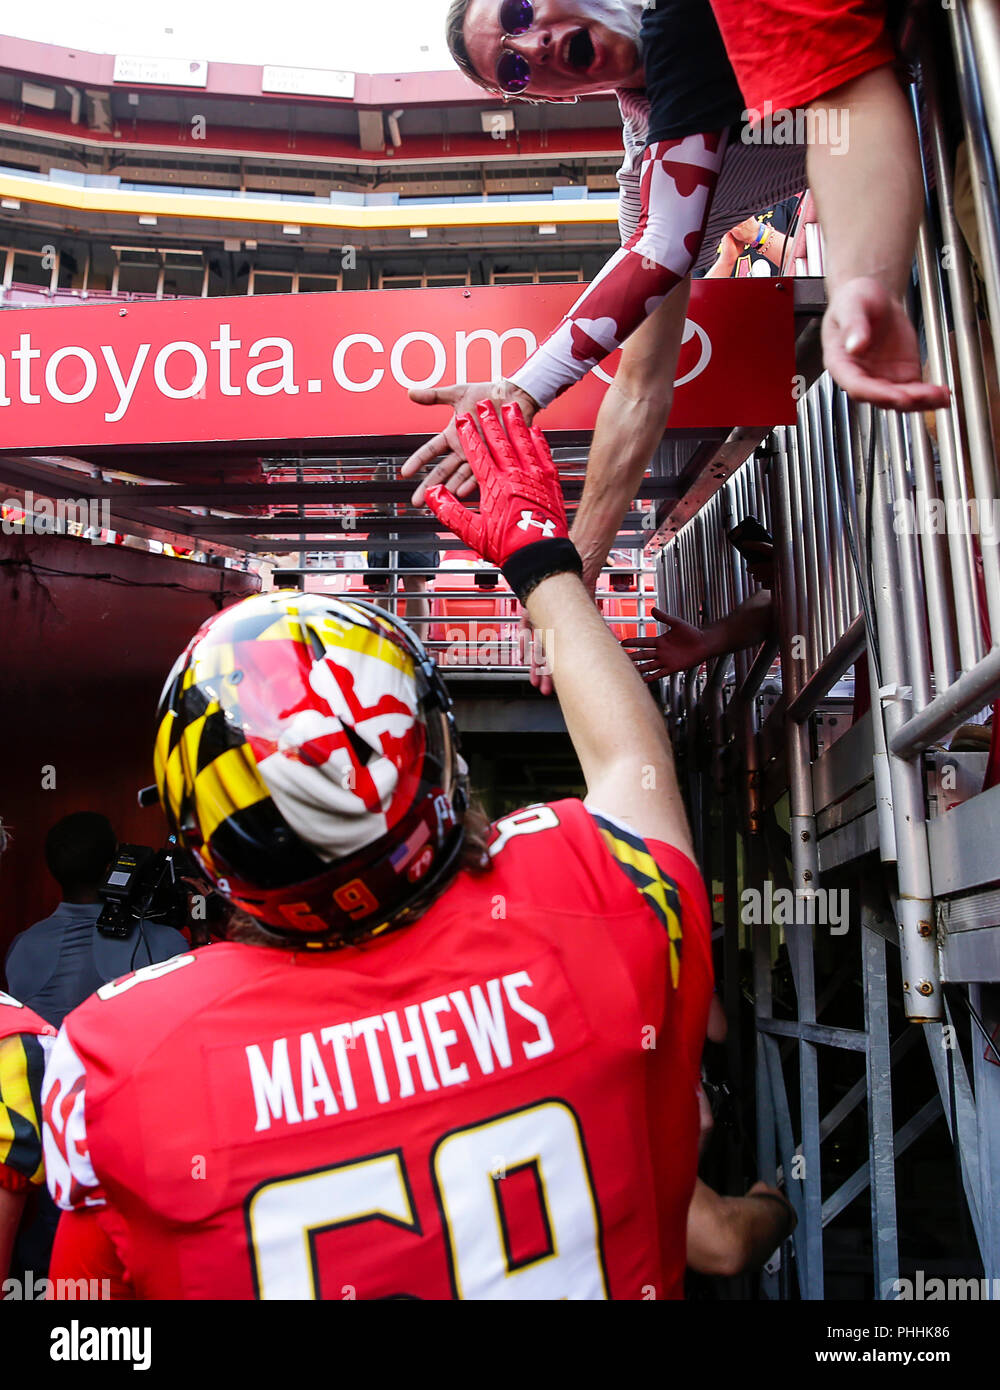 September 1, 2018: University of Maryland Terrapins OL #69 Gabriel Matthews gives a high five to fans after a NCAA football game between the University of Maryland Terrapins and the Texas Longhorns at Fedex Field in Washington, DC Justin Cooper/CSM Stock Photo